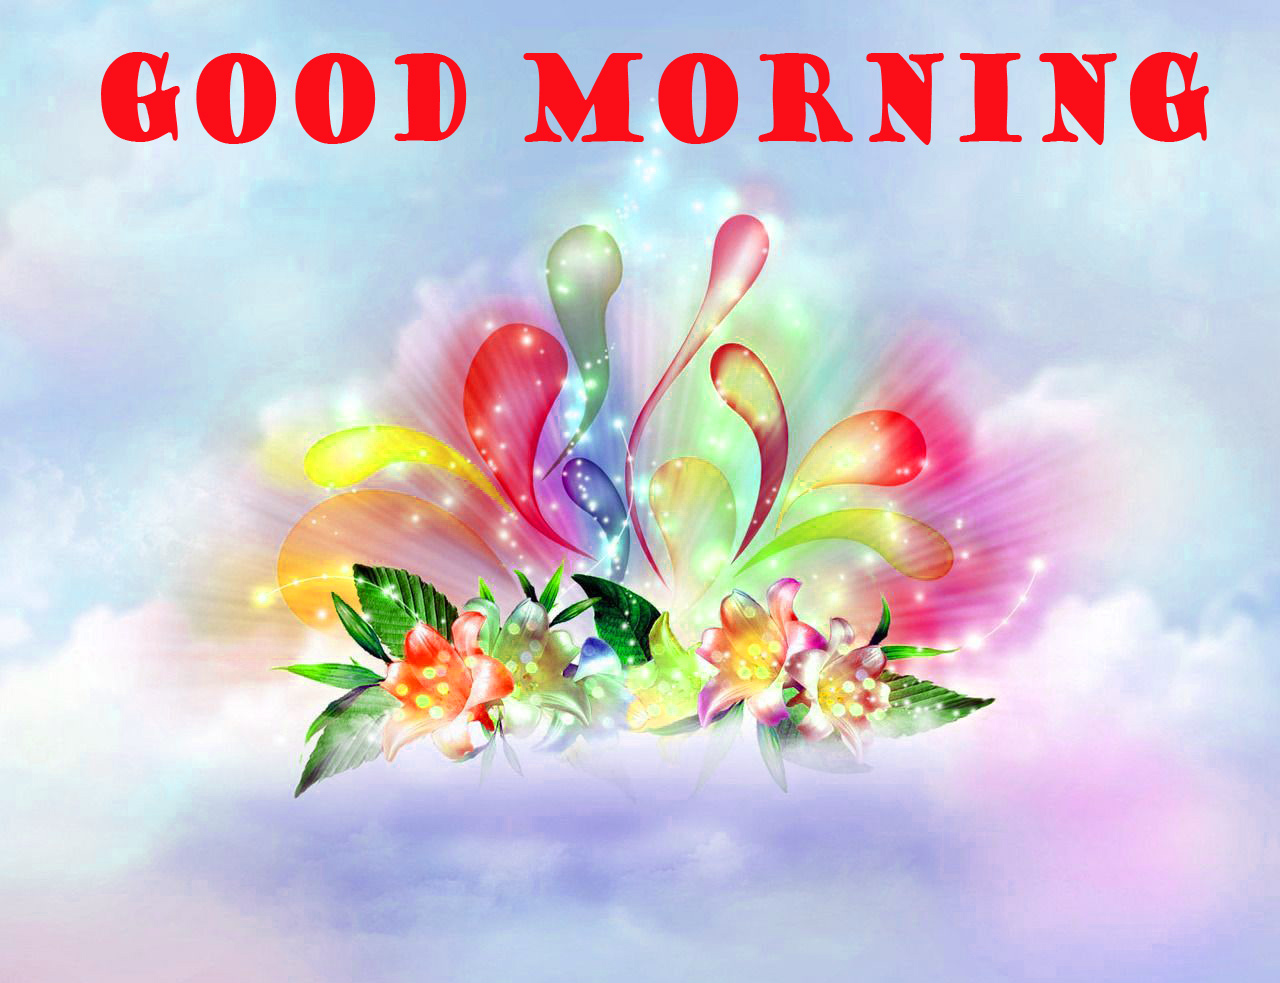 Good Morning New Images Hd - 1280x983 Wallpaper 